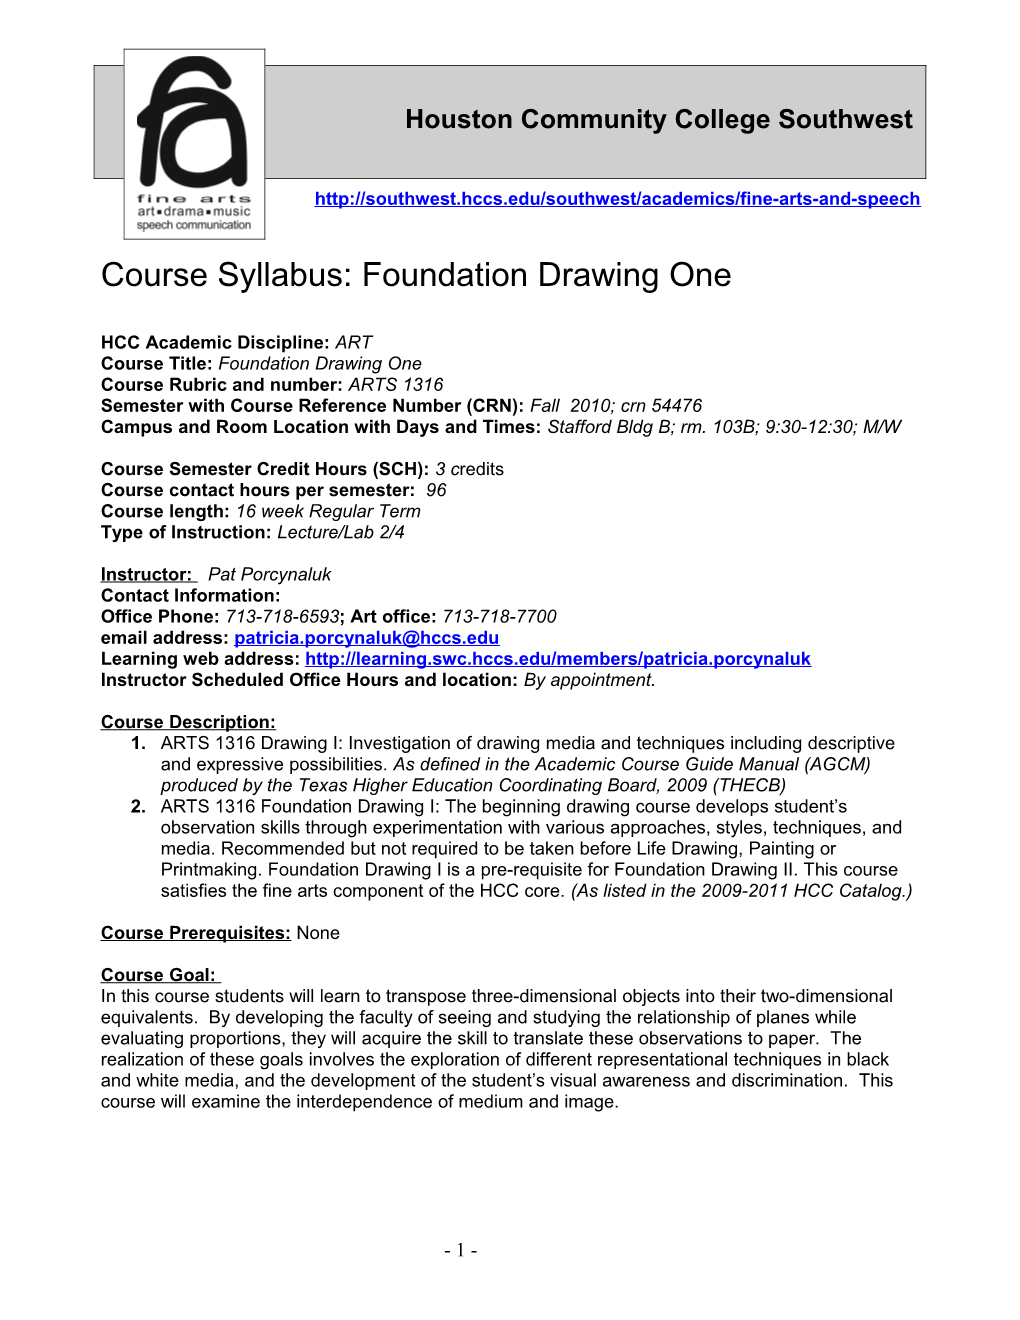 Course Syllabus: Foundation Drawing One